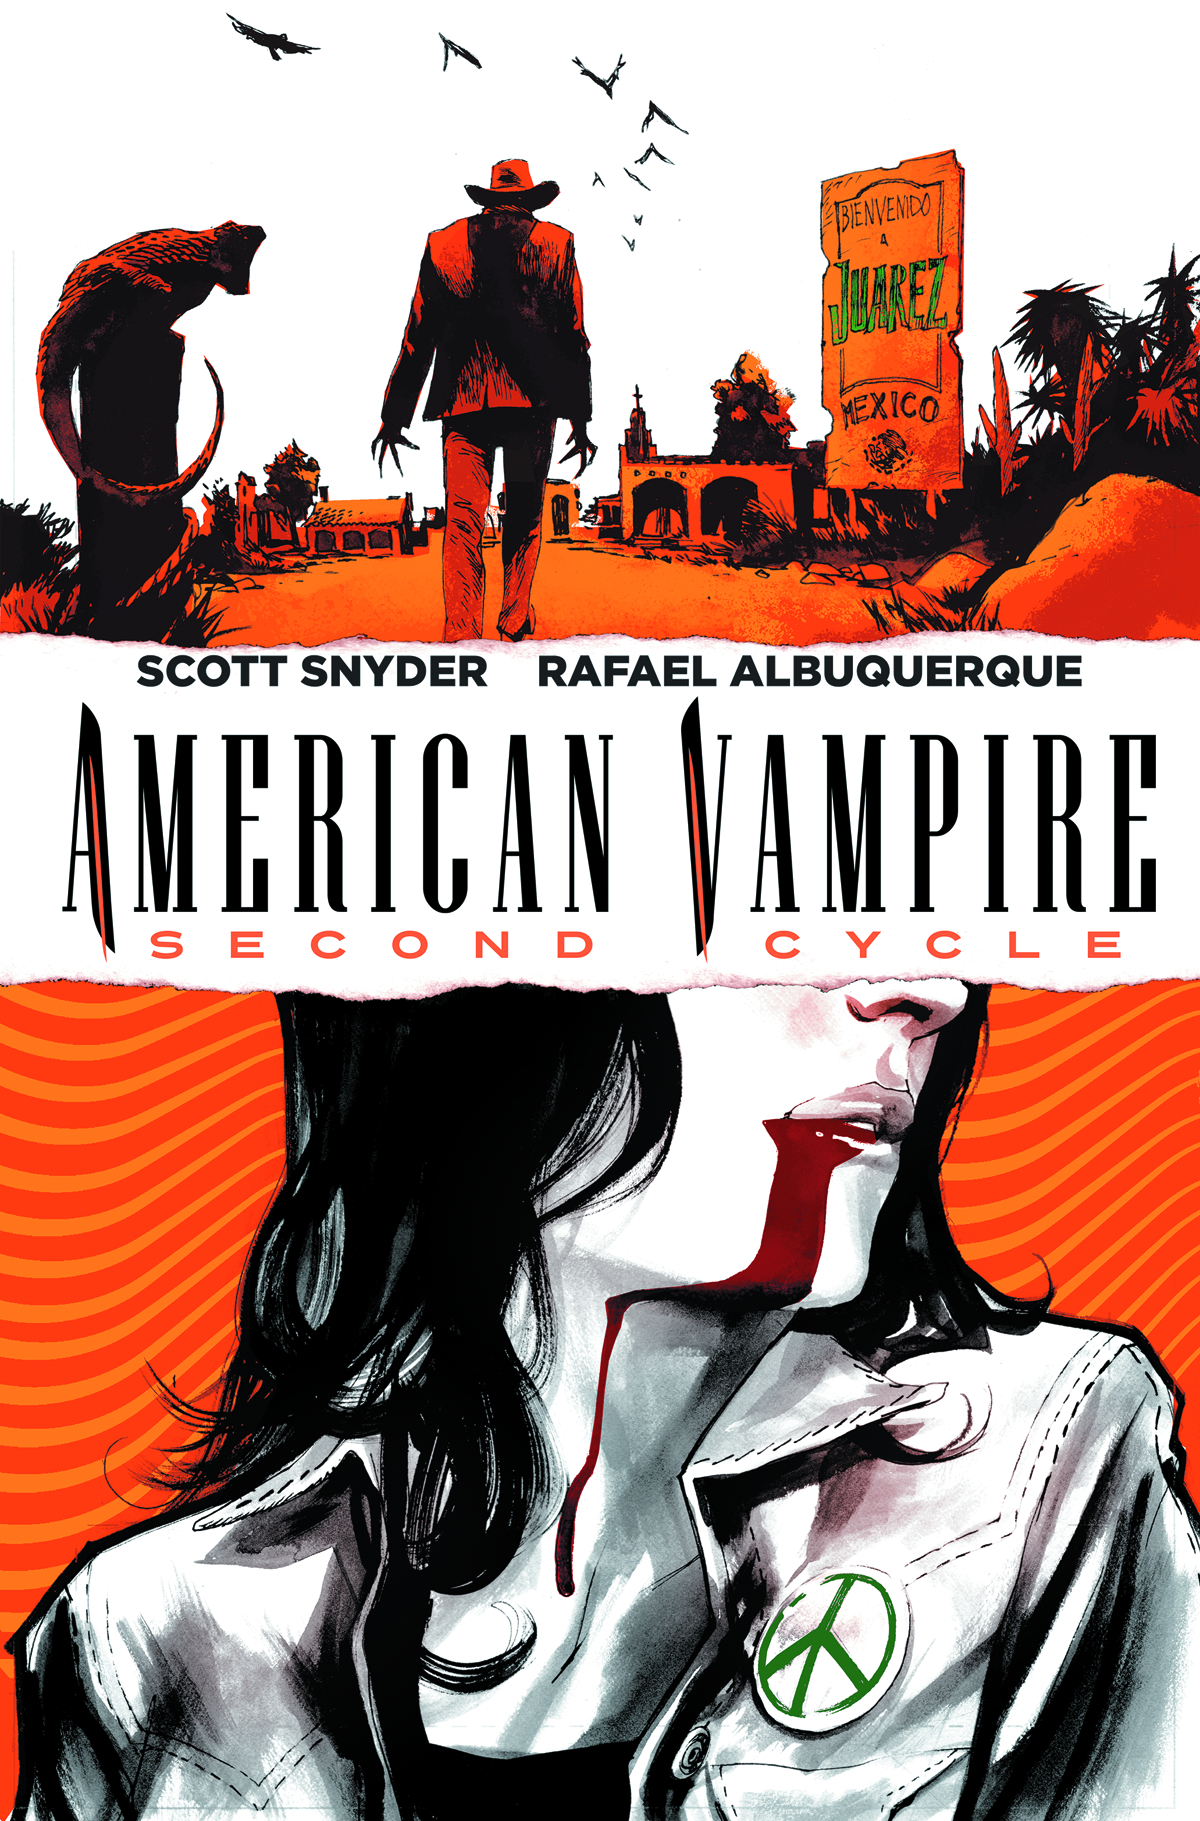 AMERICAN VAMPIRE SECOND CYCLE #1 (MR)